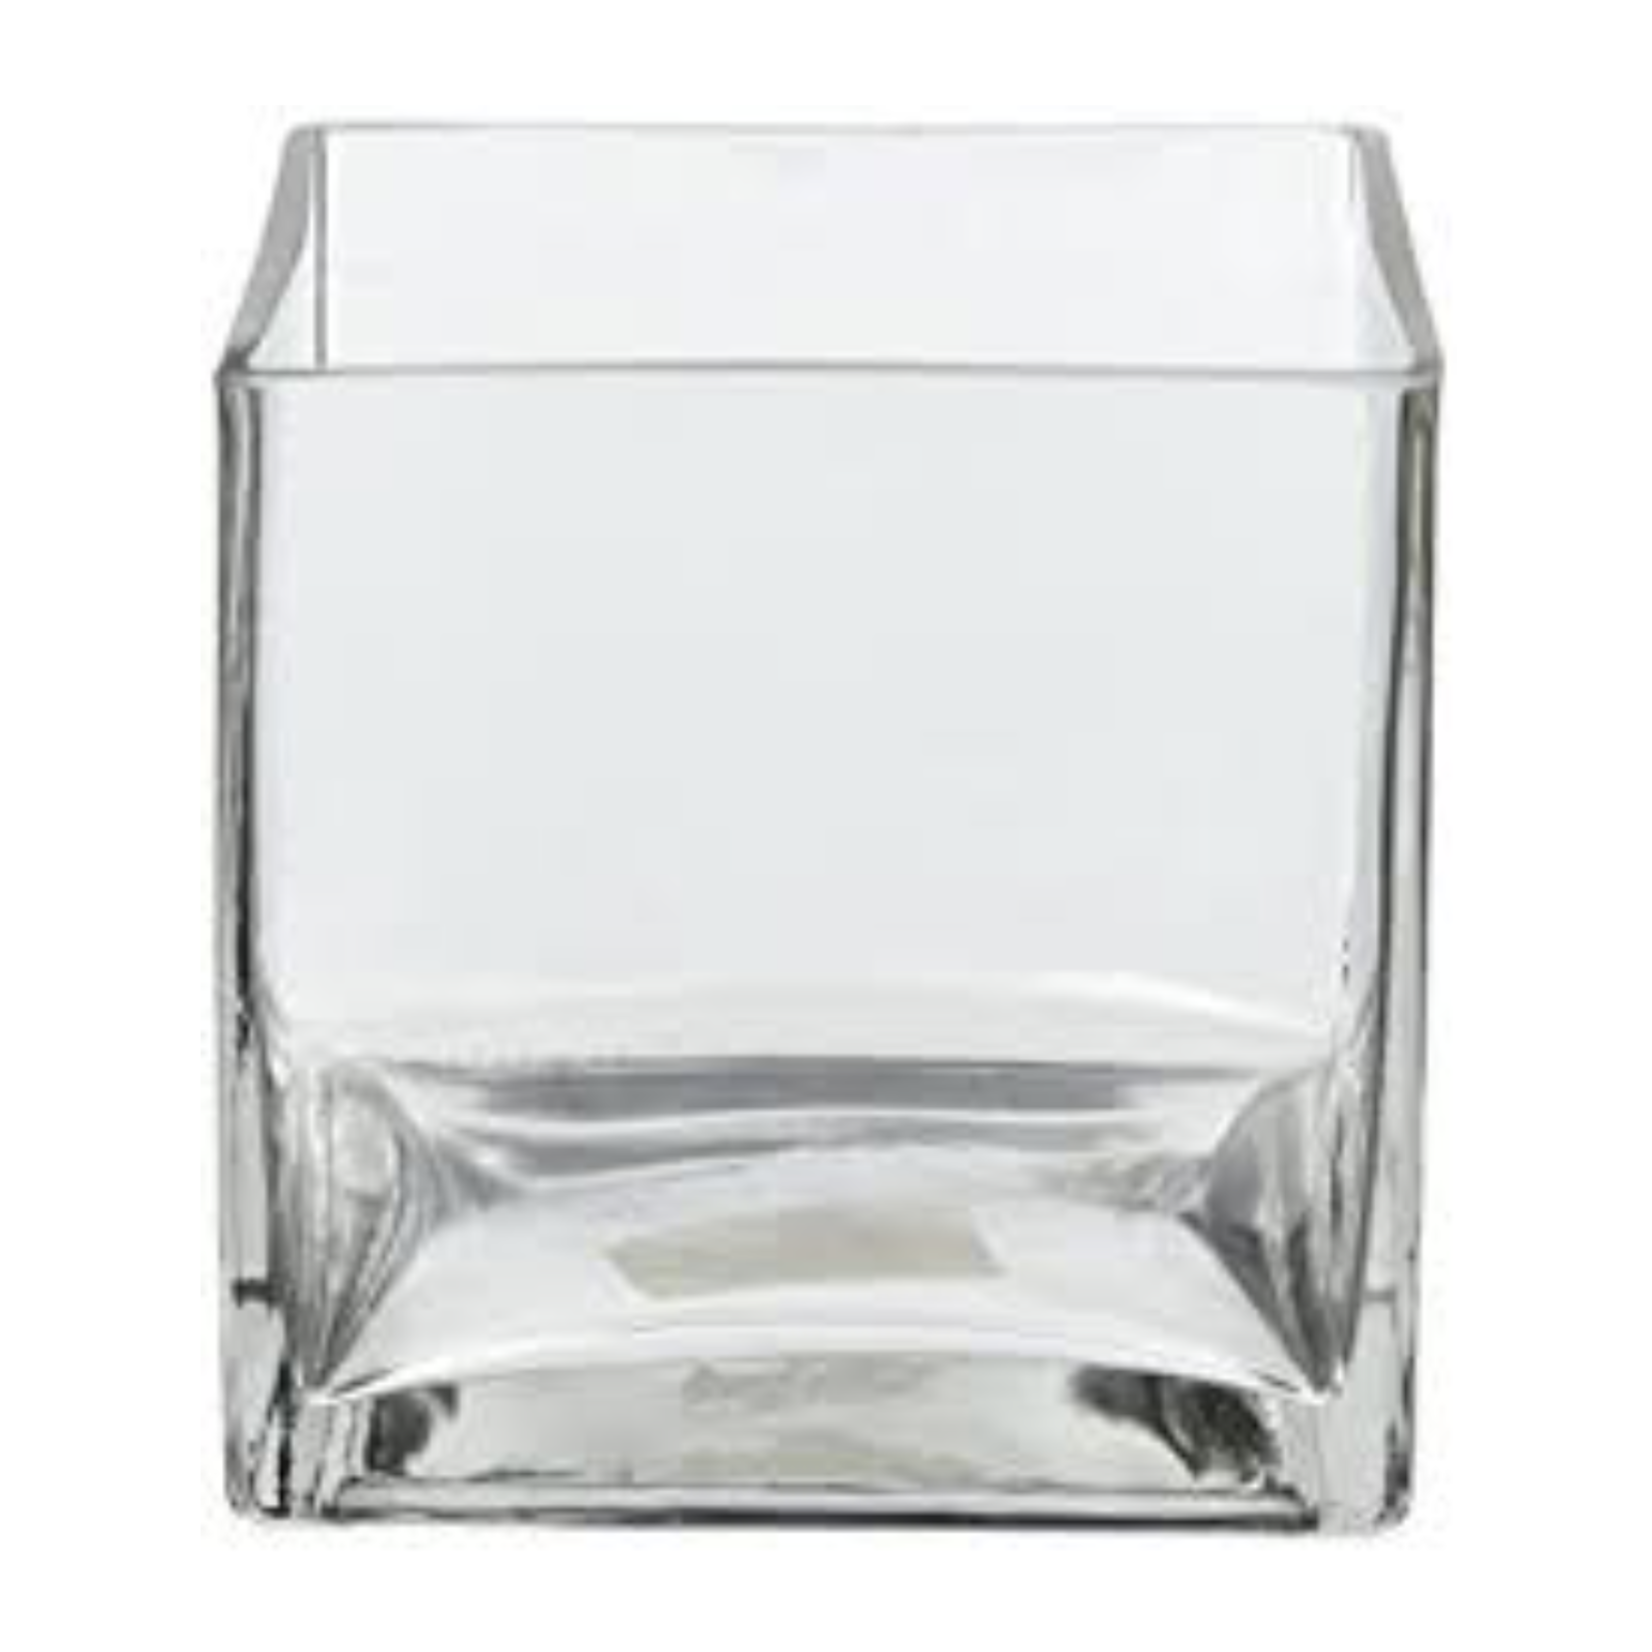 10" X 10" X 10" CLEAR GLASS CUBE VASE